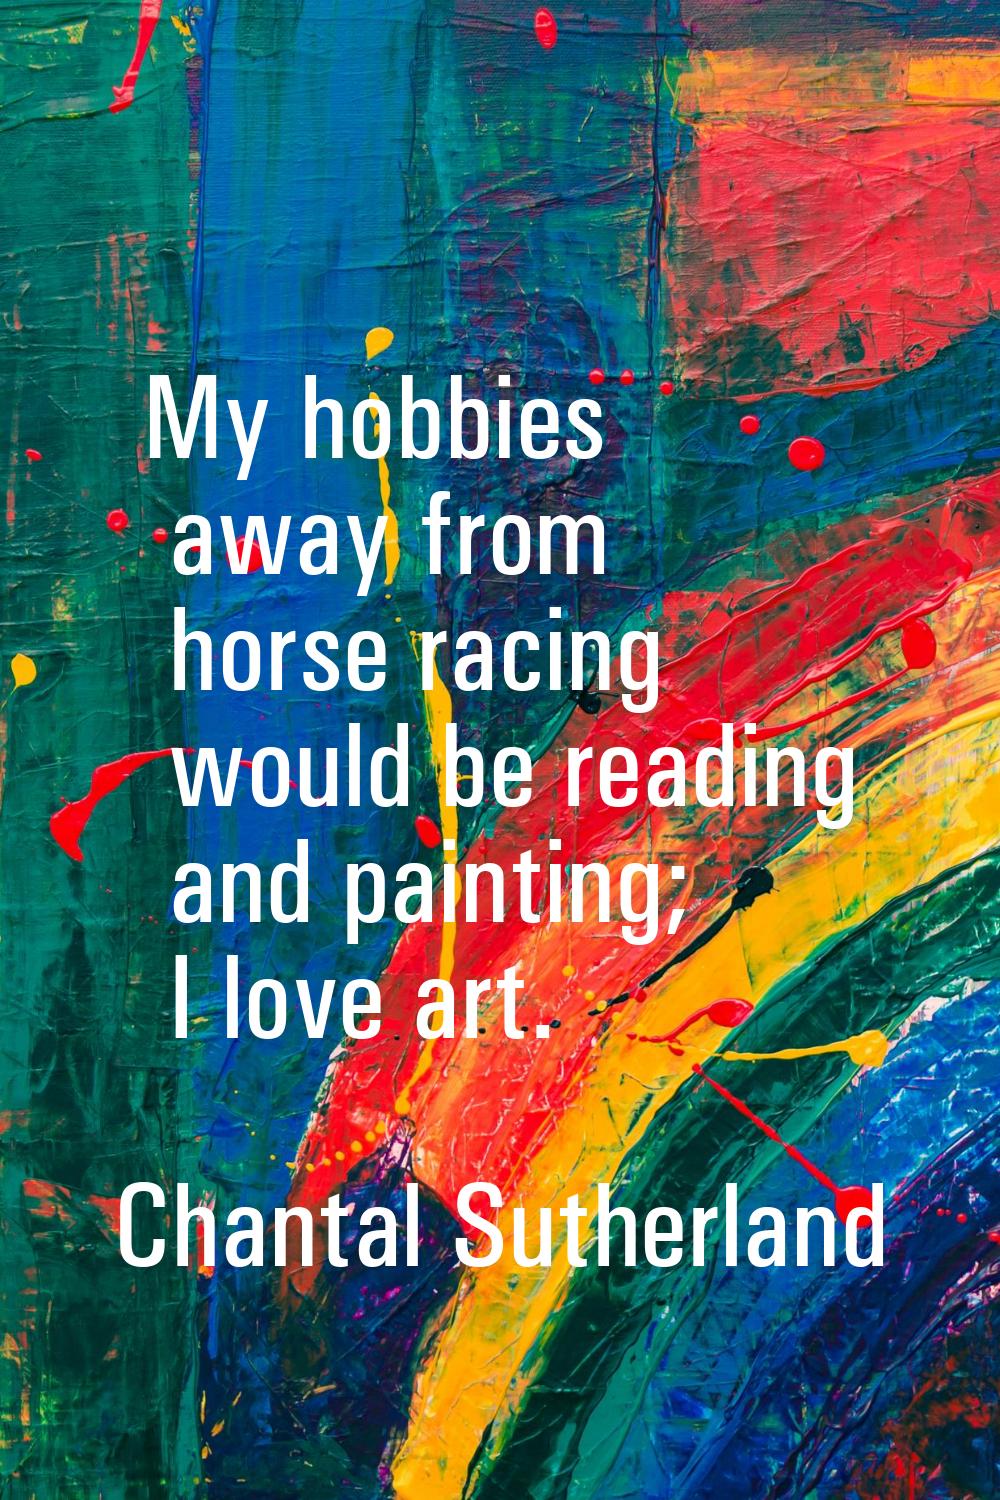 My hobbies away from horse racing would be reading and painting; I love art.